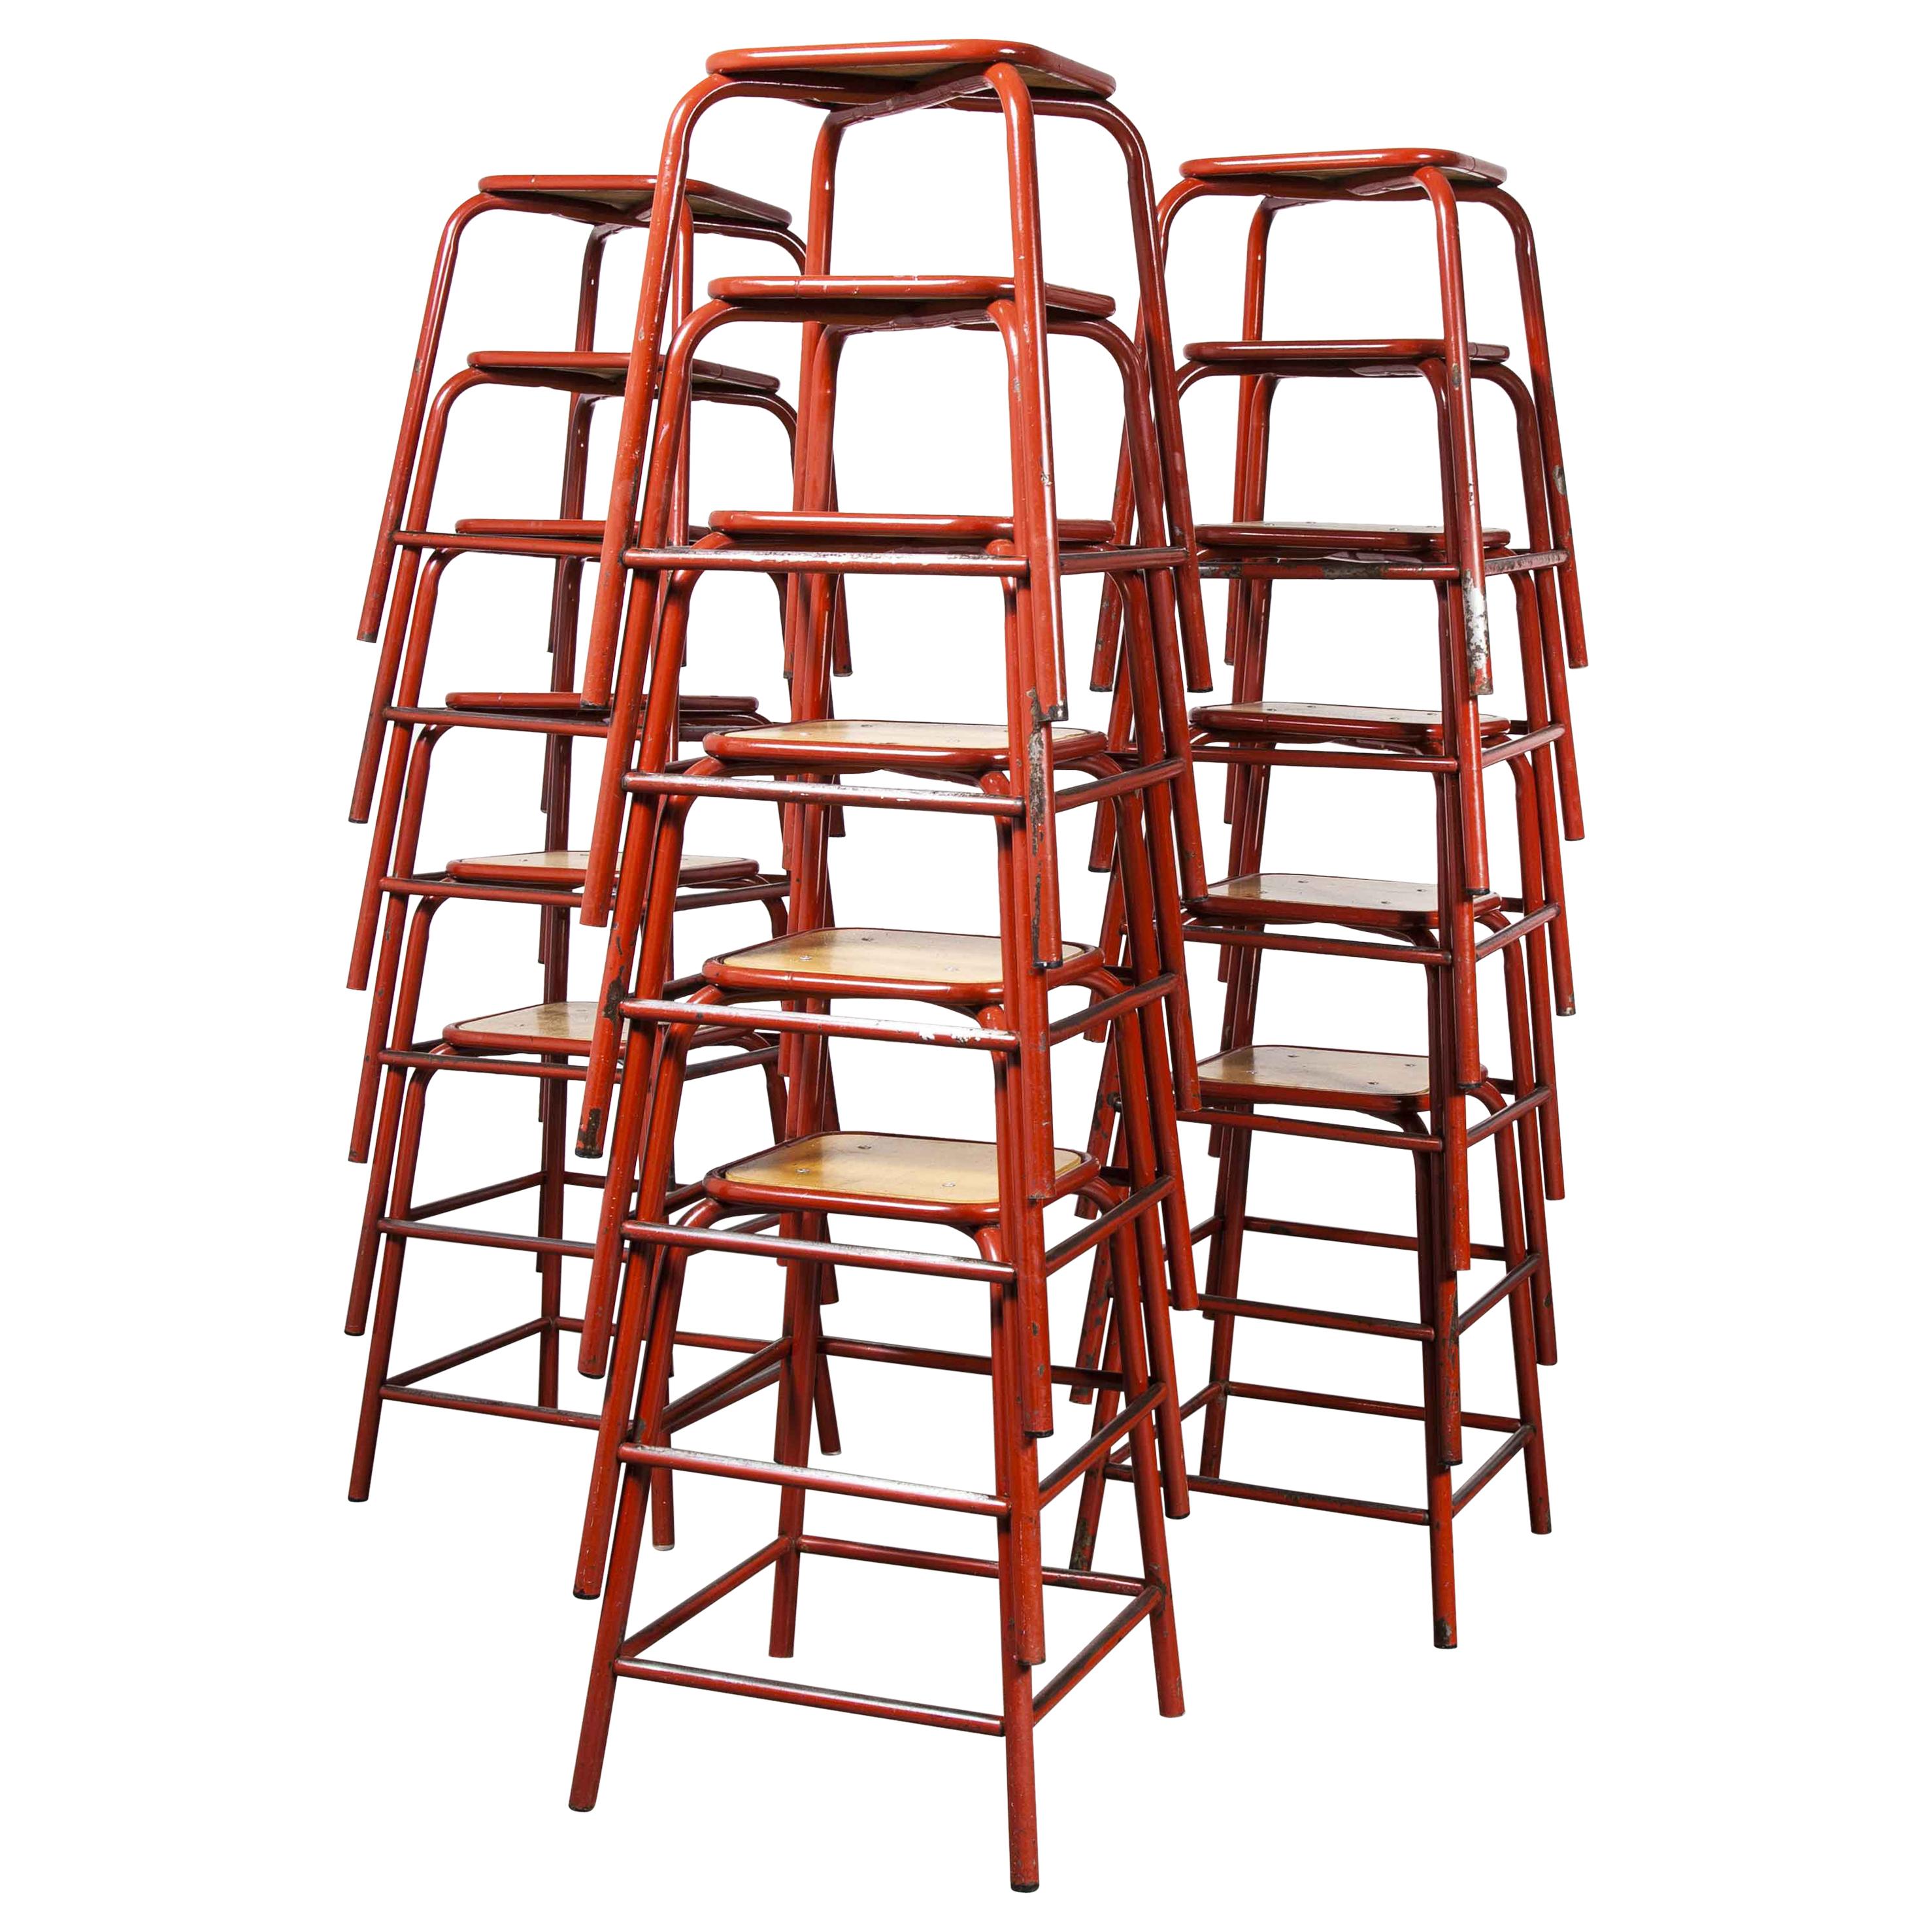 1960's French Mullca Vintage Stacking Laboratory Stool, Red - LAST FEW REMAINING For Sale